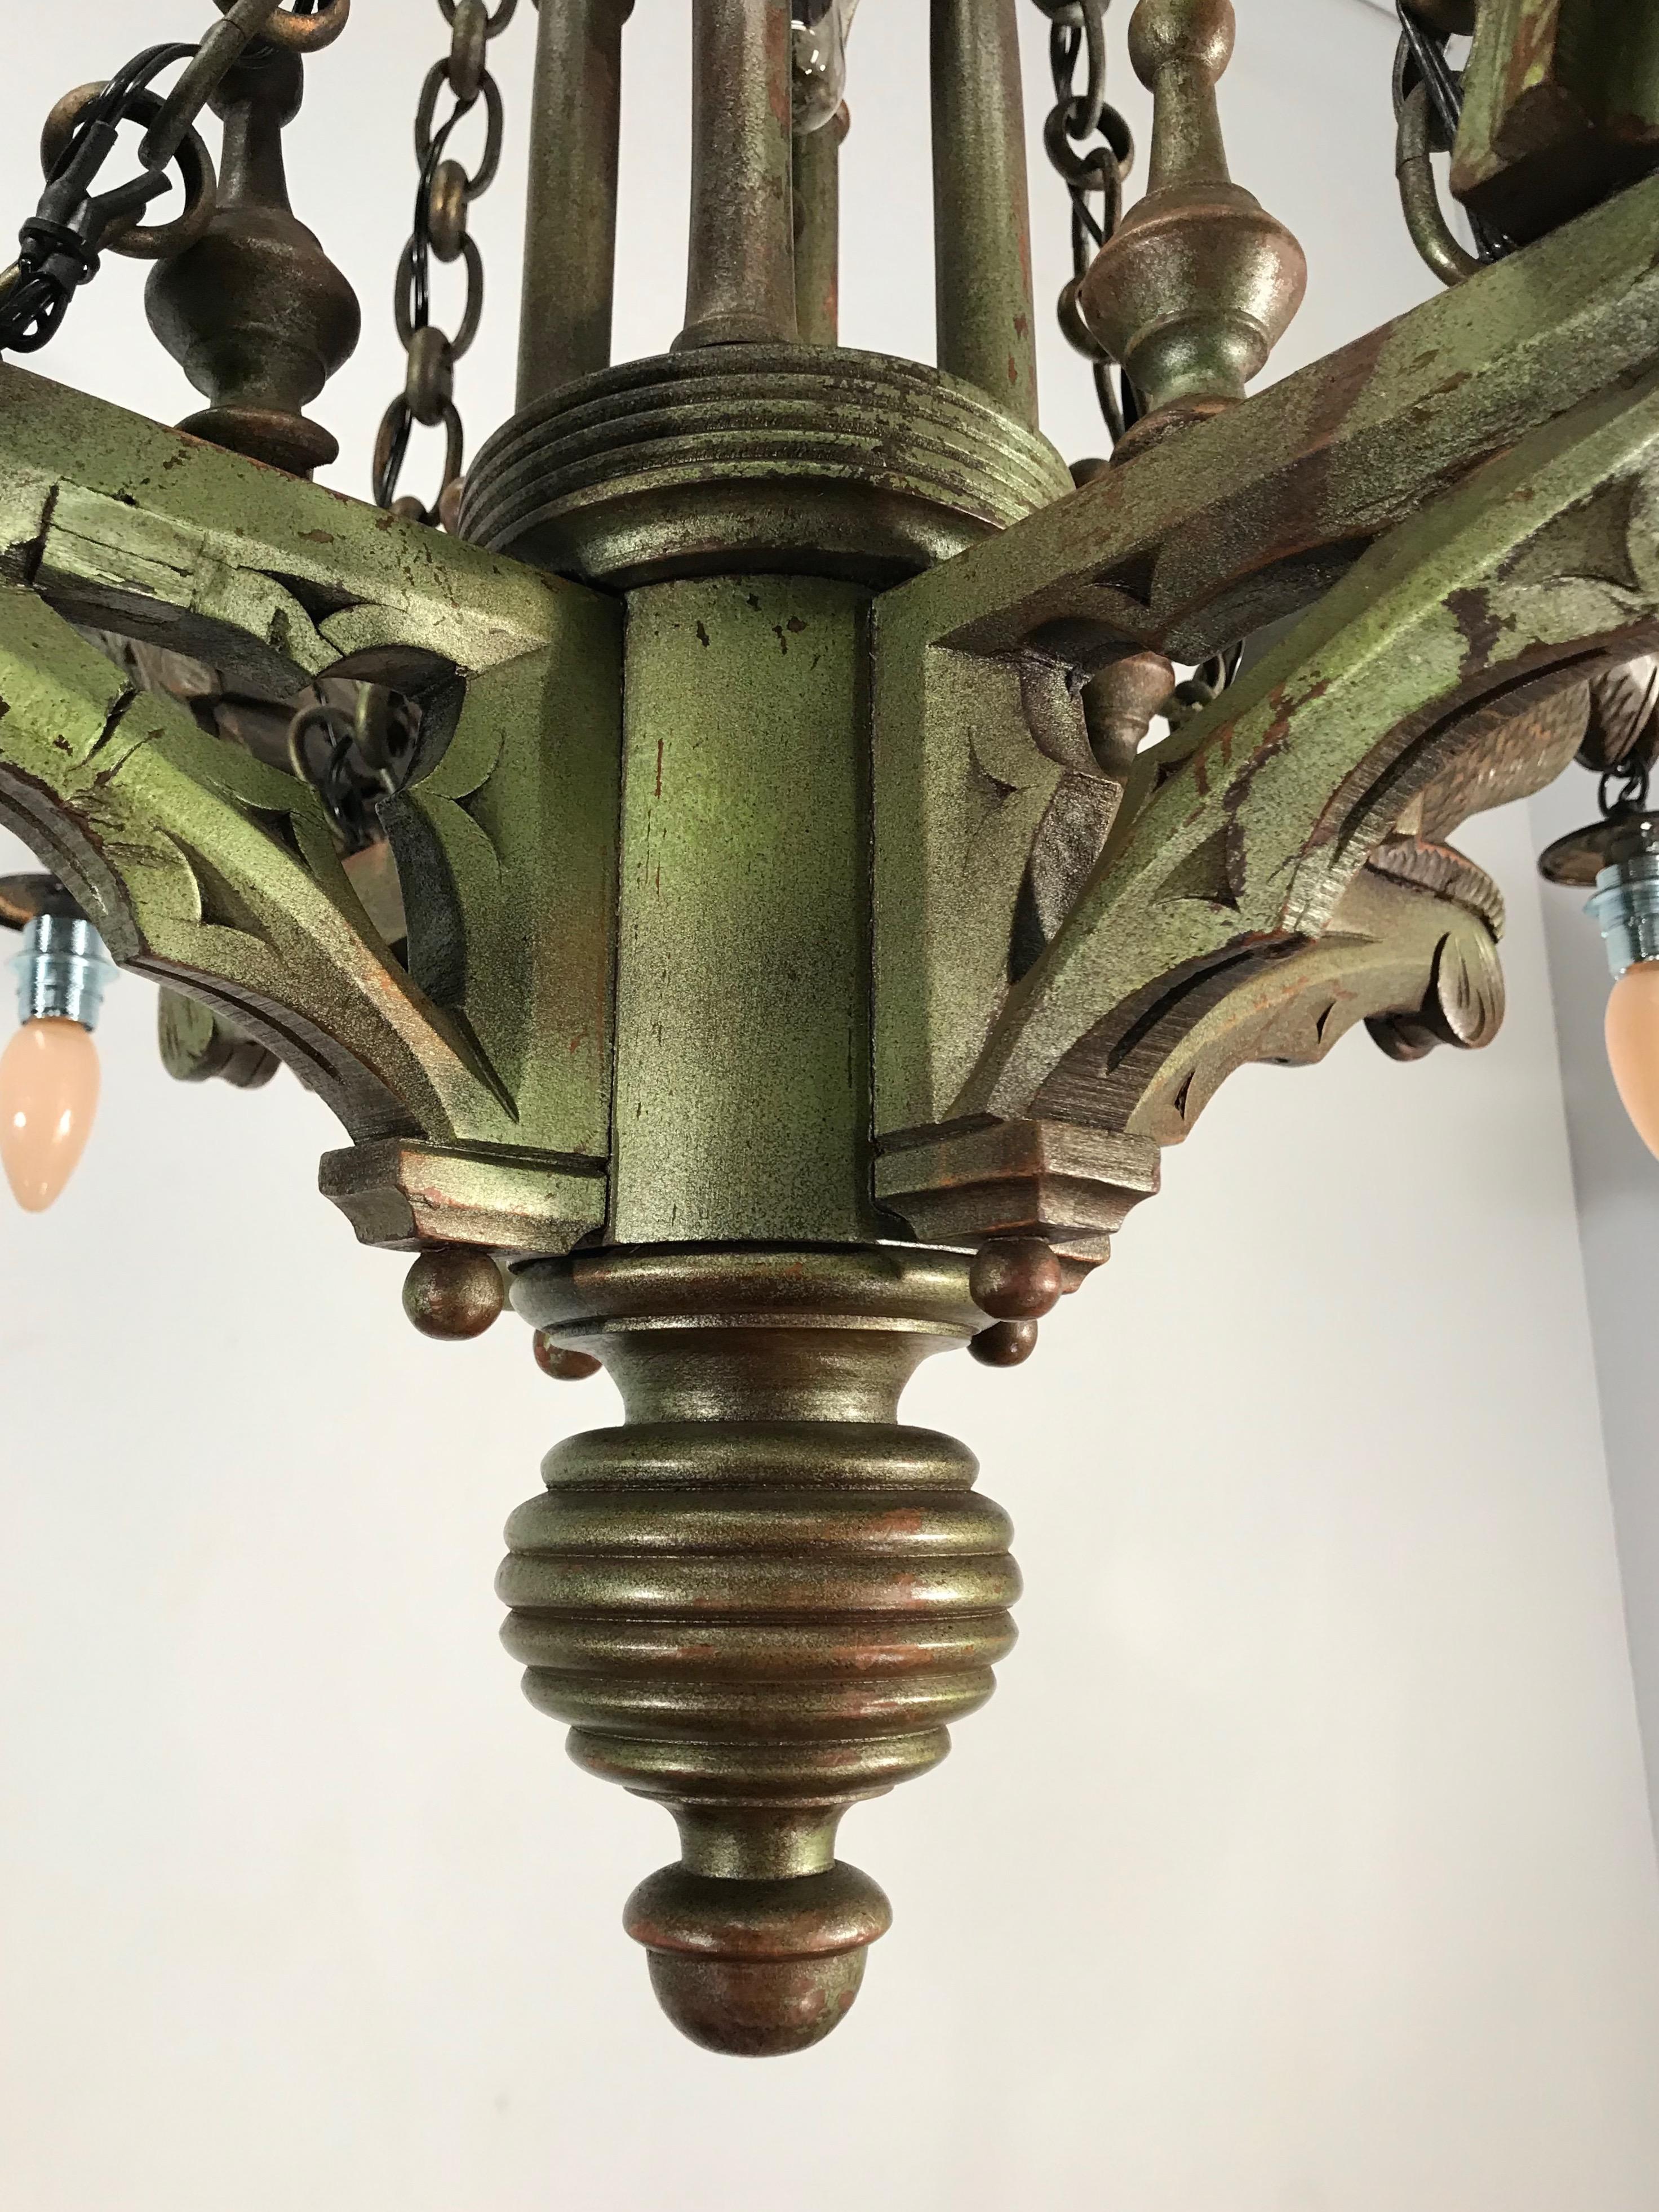 Rare Hand Carved Wooden Gothic Revival Art Chandelier with Gargoyle Sculptures For Sale 1